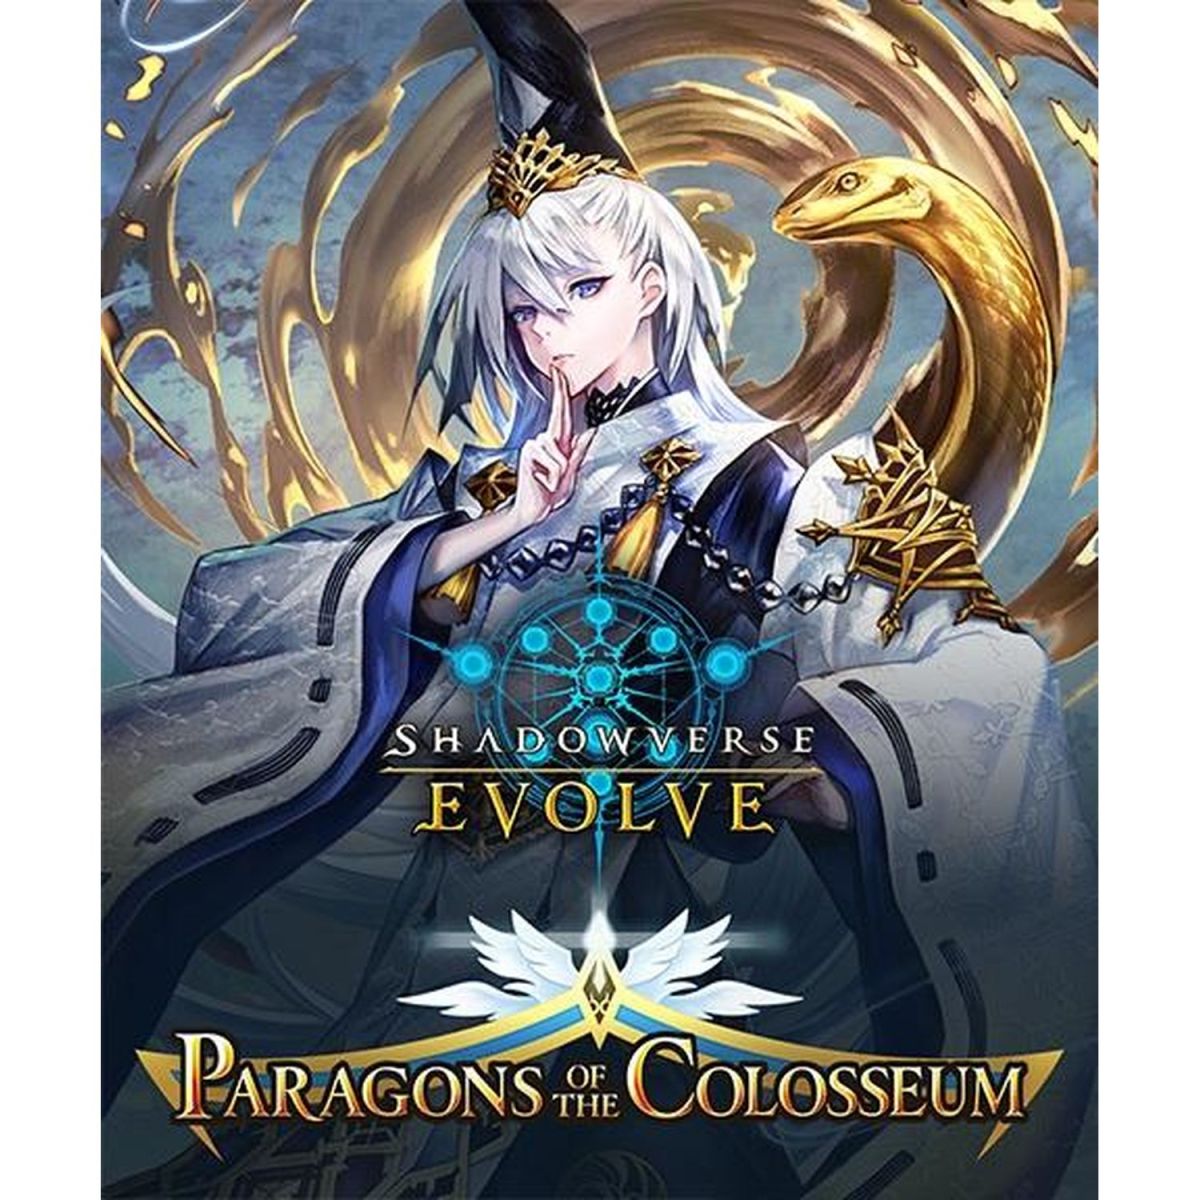 Shadowverse Evolve - Display - Box of 16 Boosters - BP06 Paragons of the Colosseum - EN